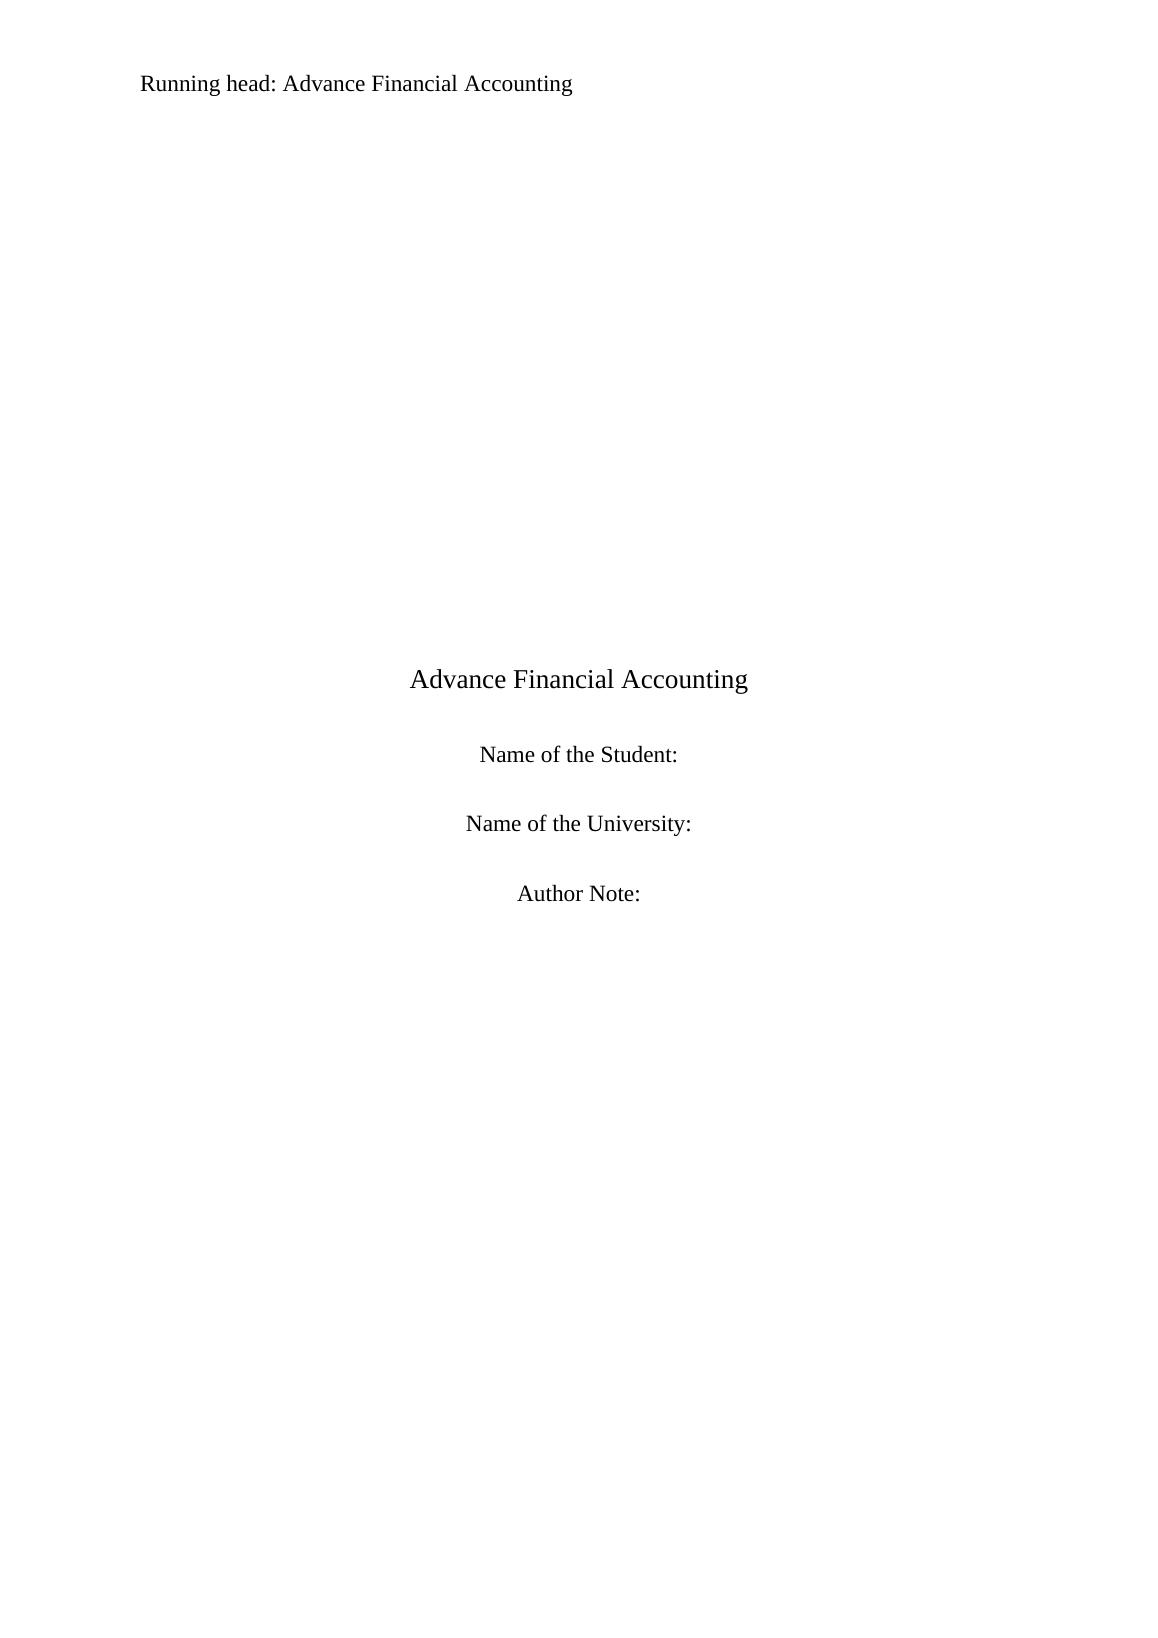 Advance Financial Accounting - Assignment_1